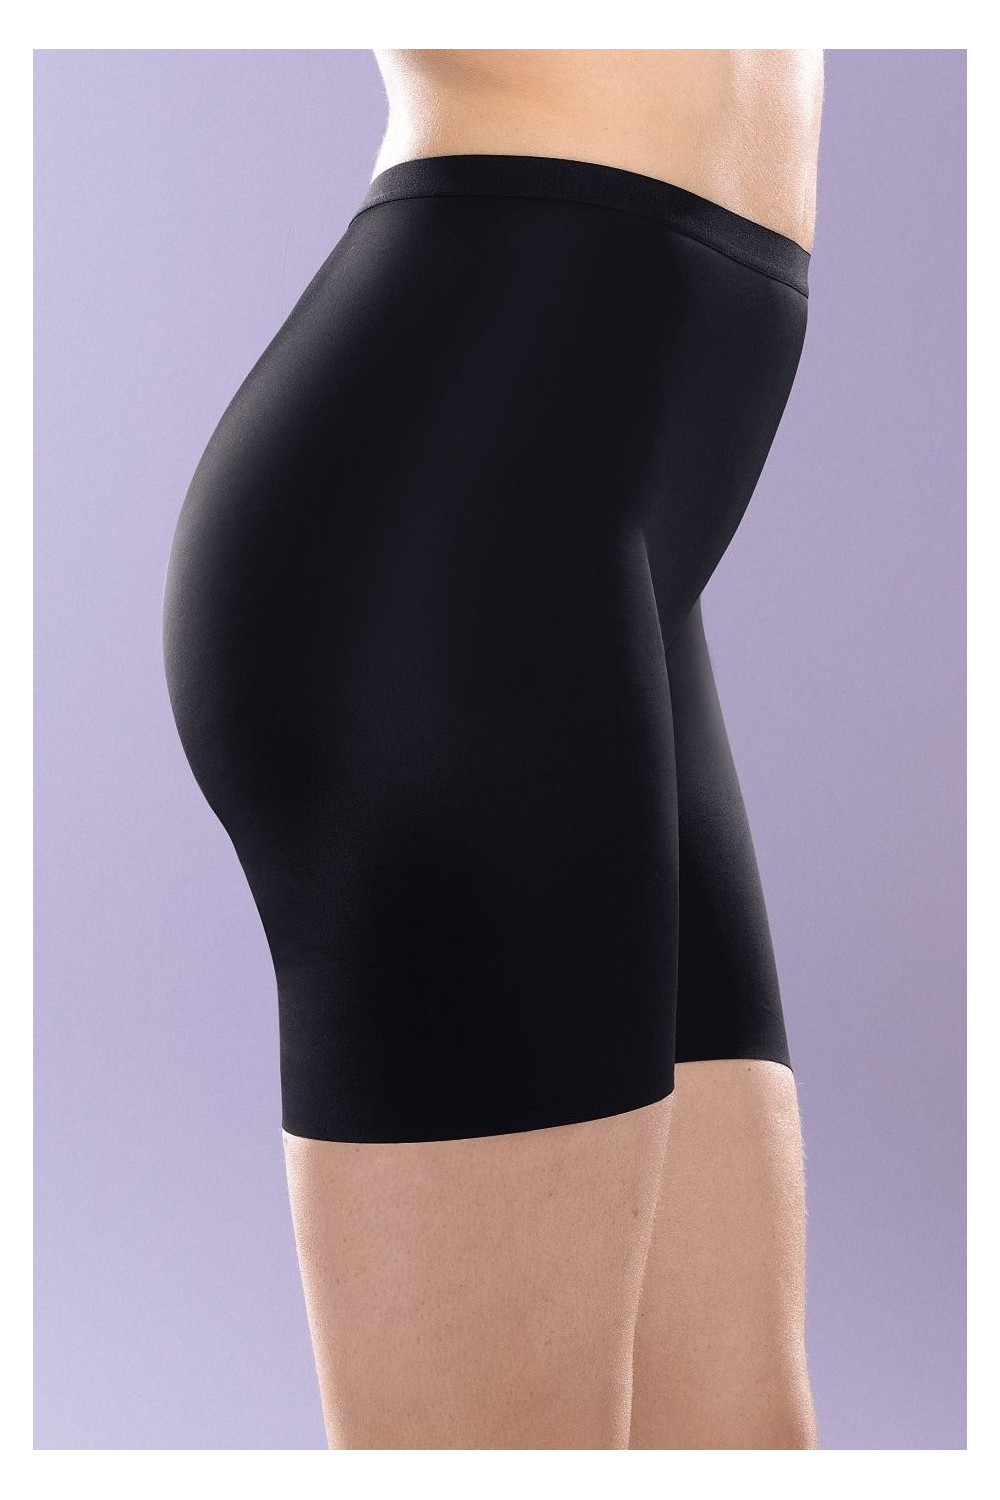 Comfortable panty girdle does not press the belly. Comfort all day long.